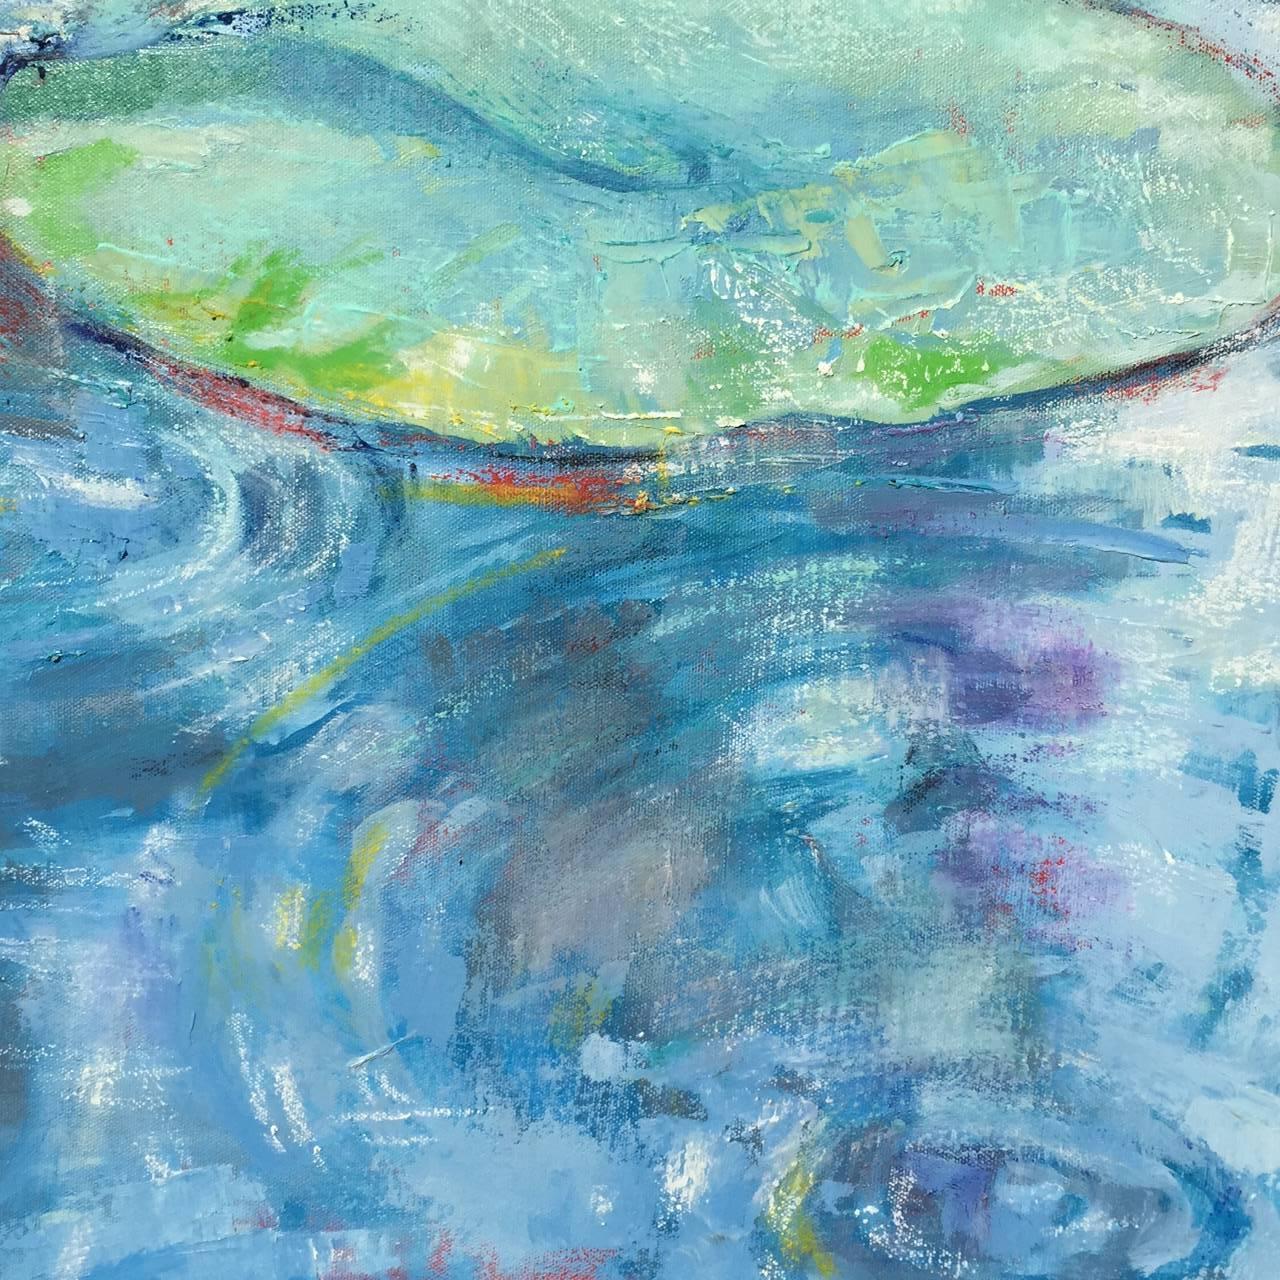 Lilly pads, water, blue, green, red, nature, Monet, rain, relaxing, calm, tranquil, water lily, water lilies, ripple, reflection, relaxing, impressionist, texture, layers, transitional, Renoir, Gustave Courbet, claude monet

Miranda Girard is an